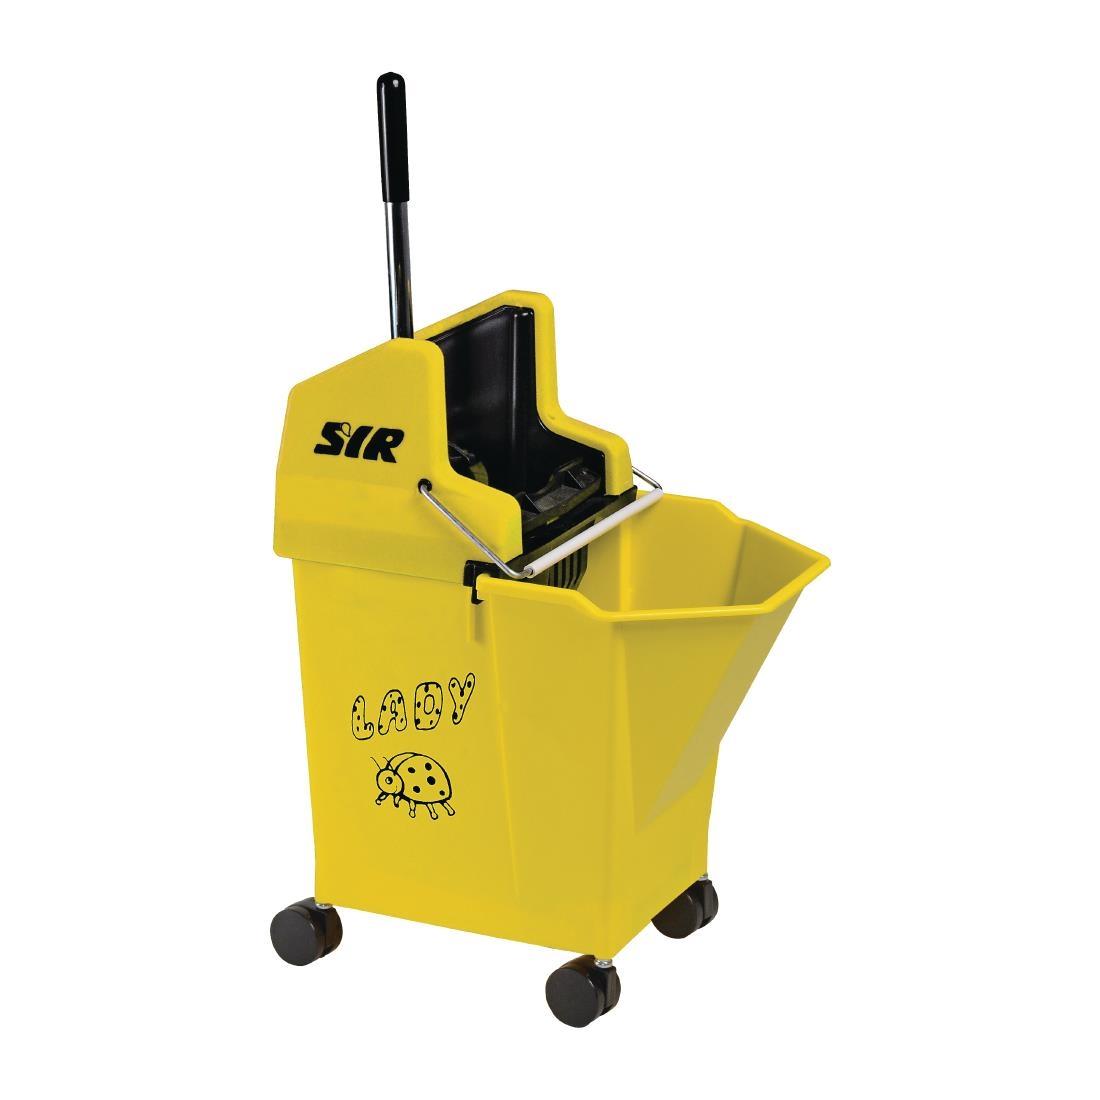 SYR NU Lady 2 Combine System Mop Bucket and Wringer 9Ltr Yellow - FT334  - 1